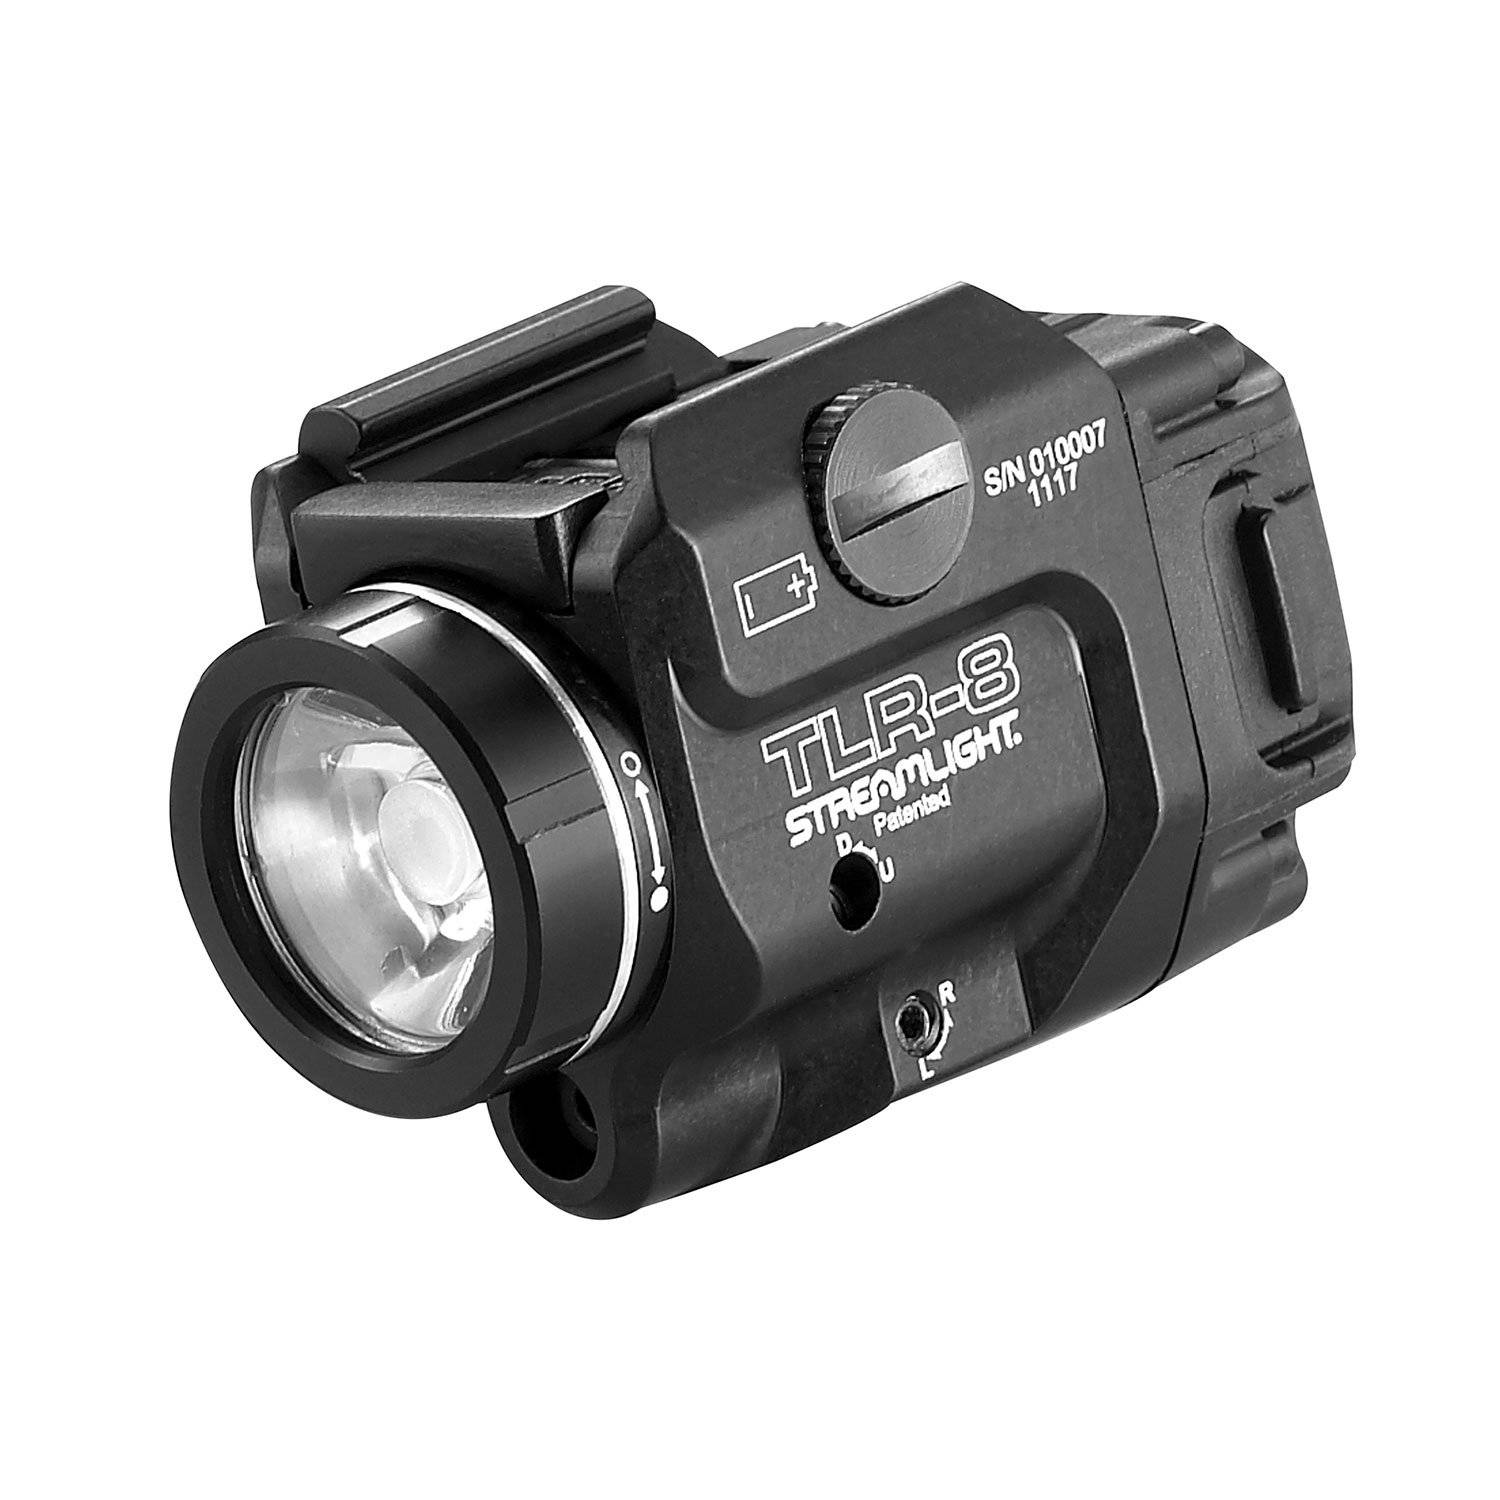 Streamlight TLR-8 Weapon Light with Laser Sight